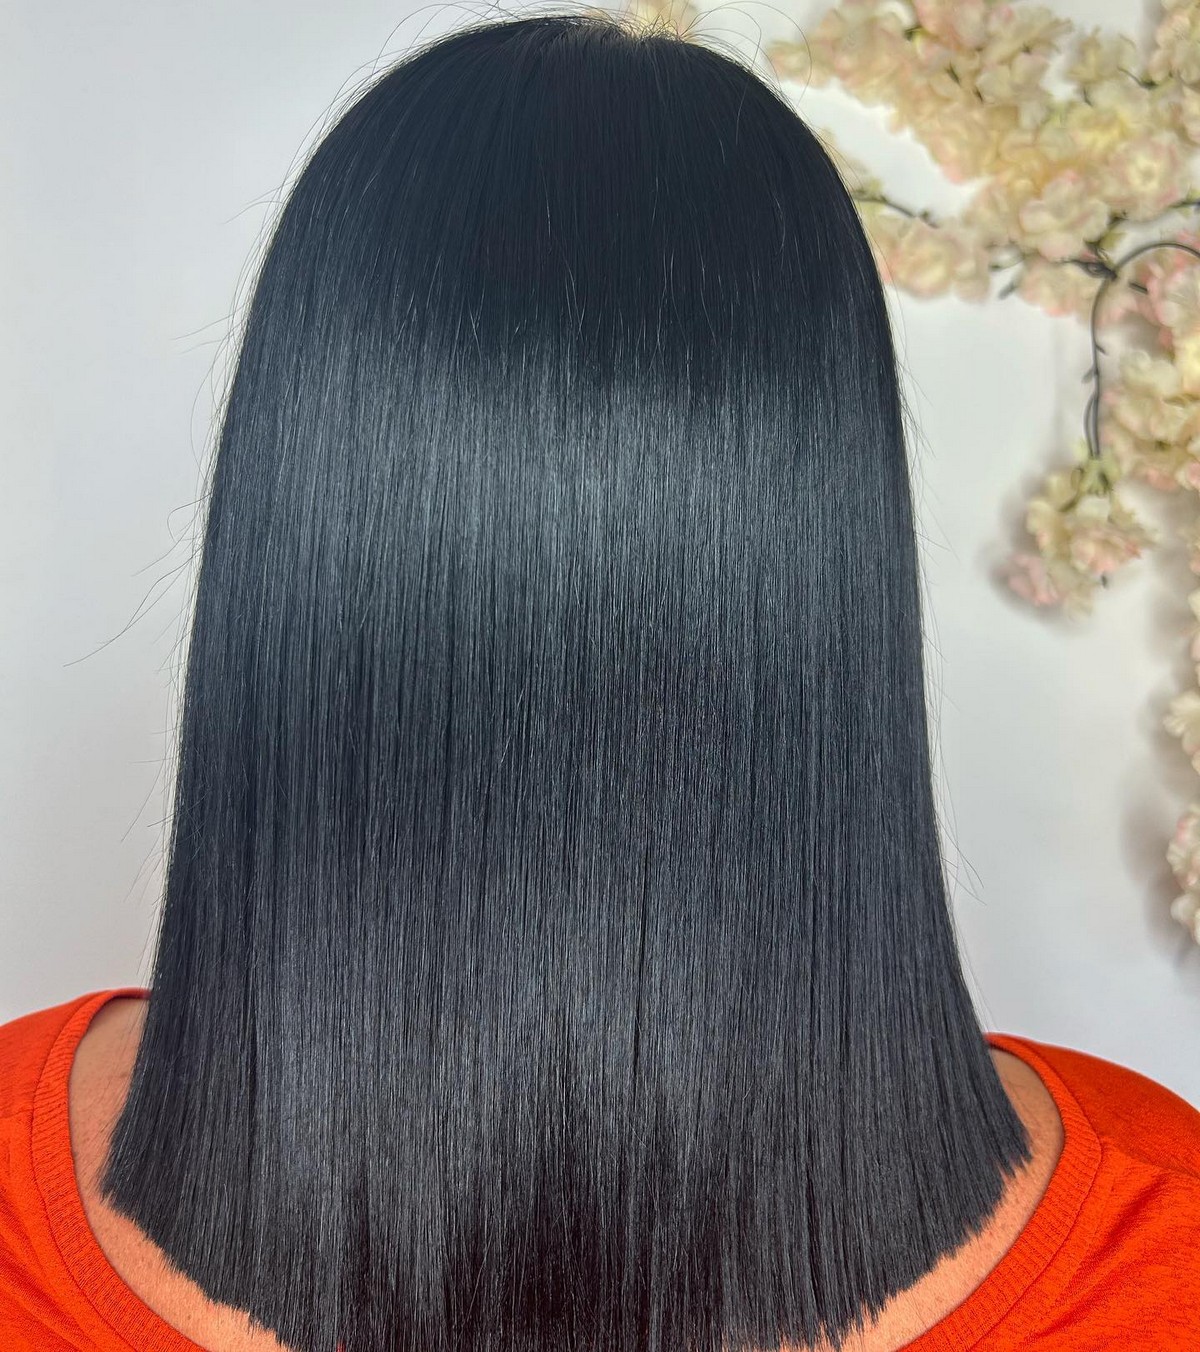 Why Is It Challenging To Dye Black Hair?